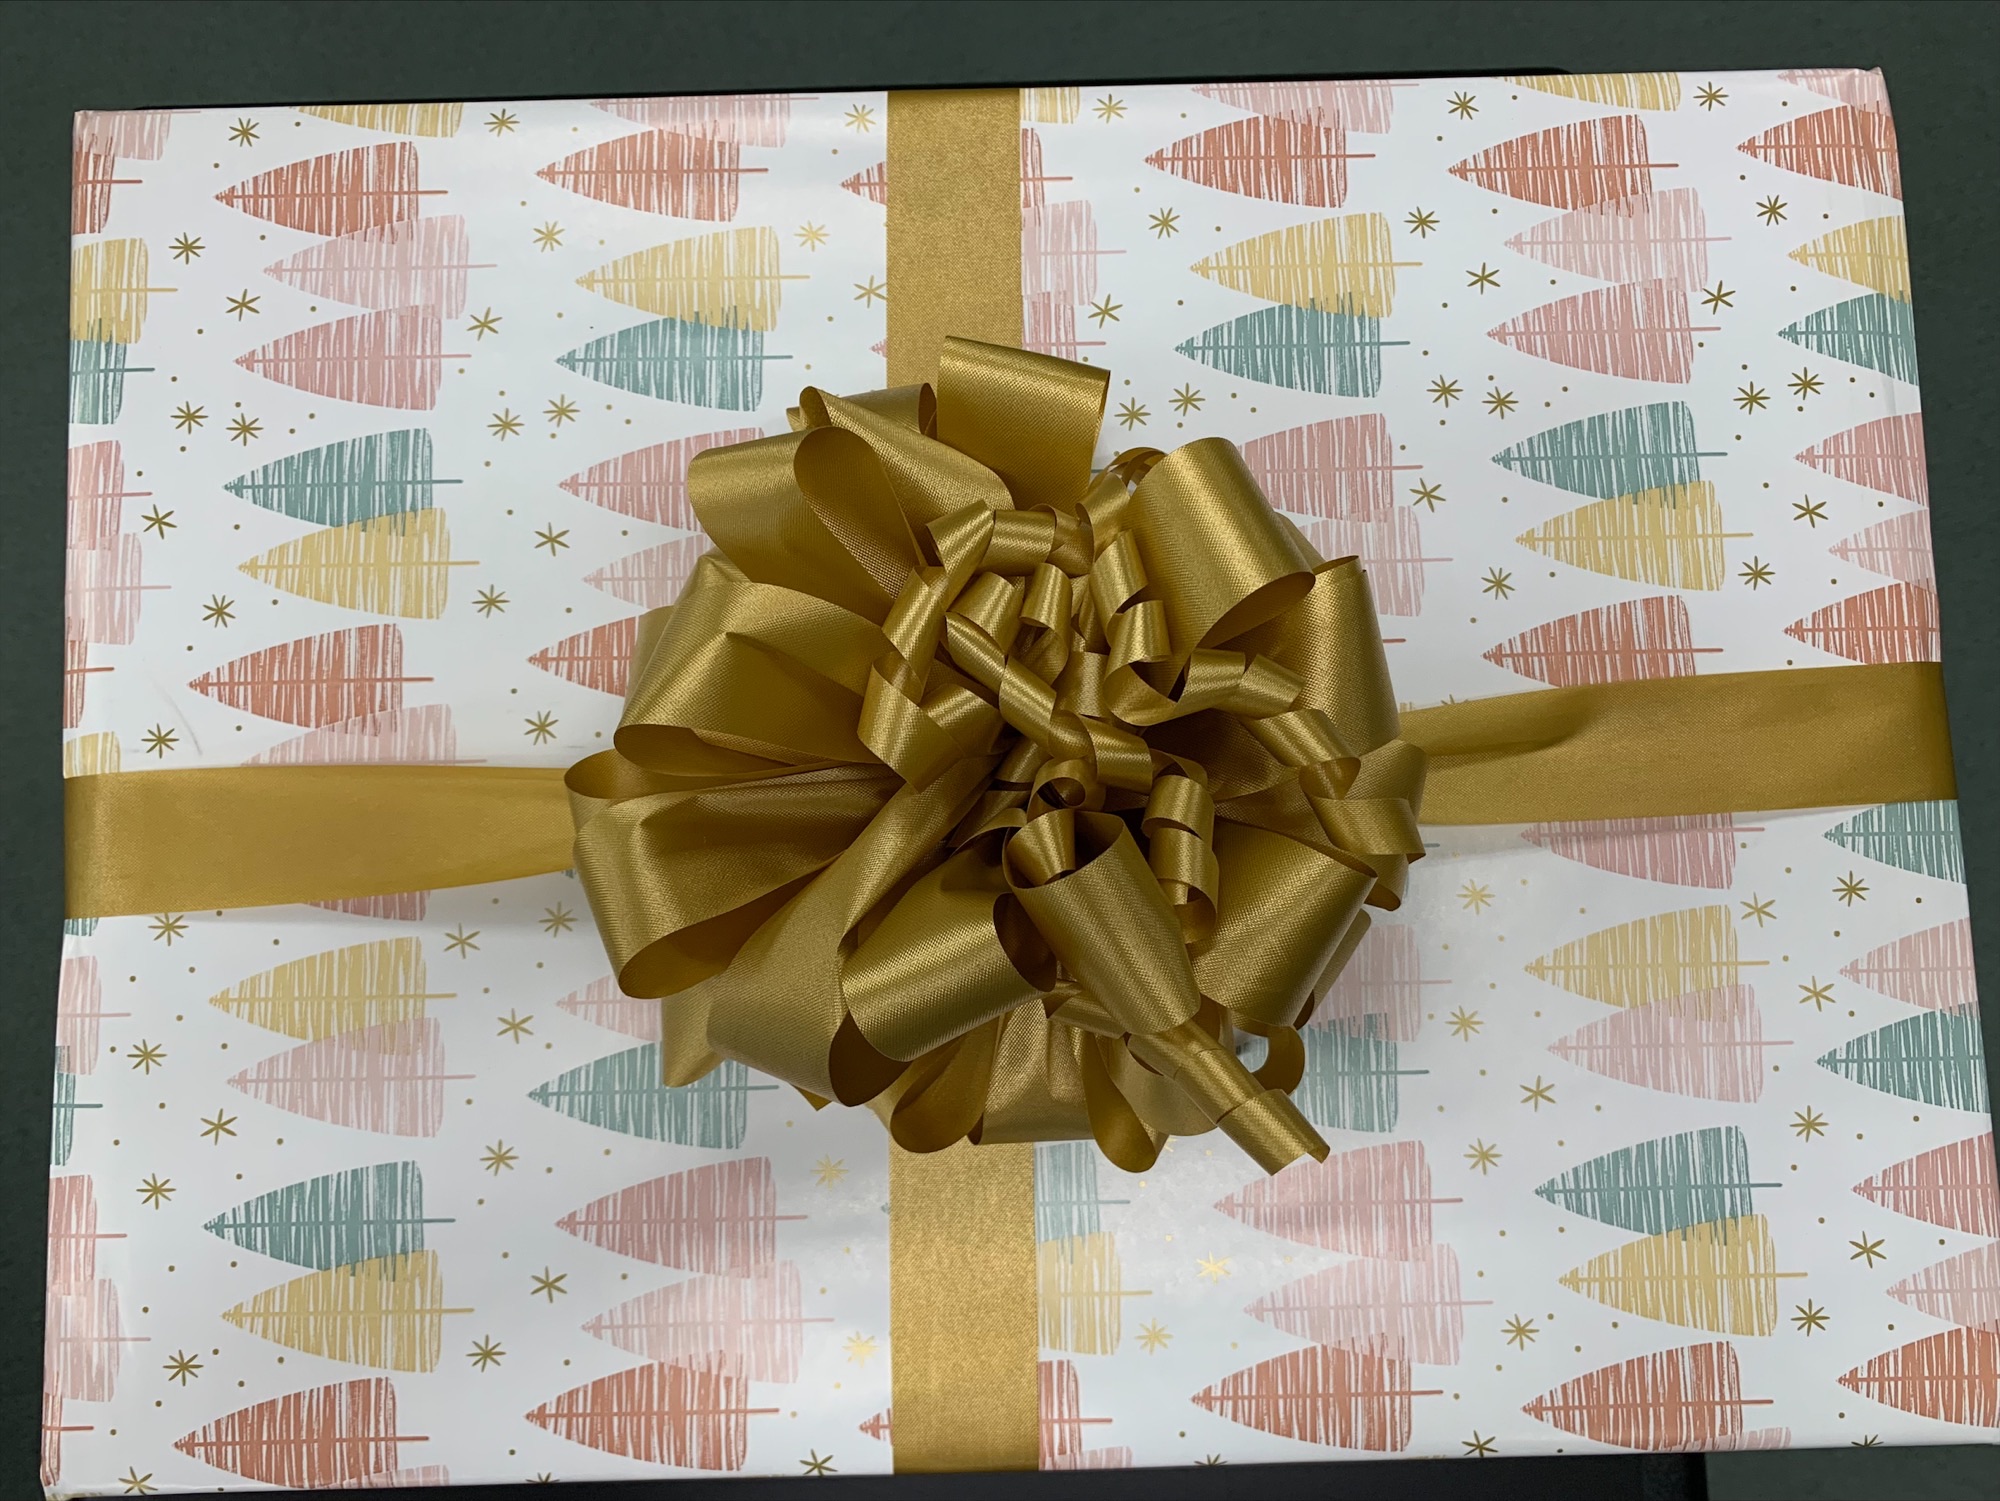 the finished product - the present is wrapped with a fluffy gold bow